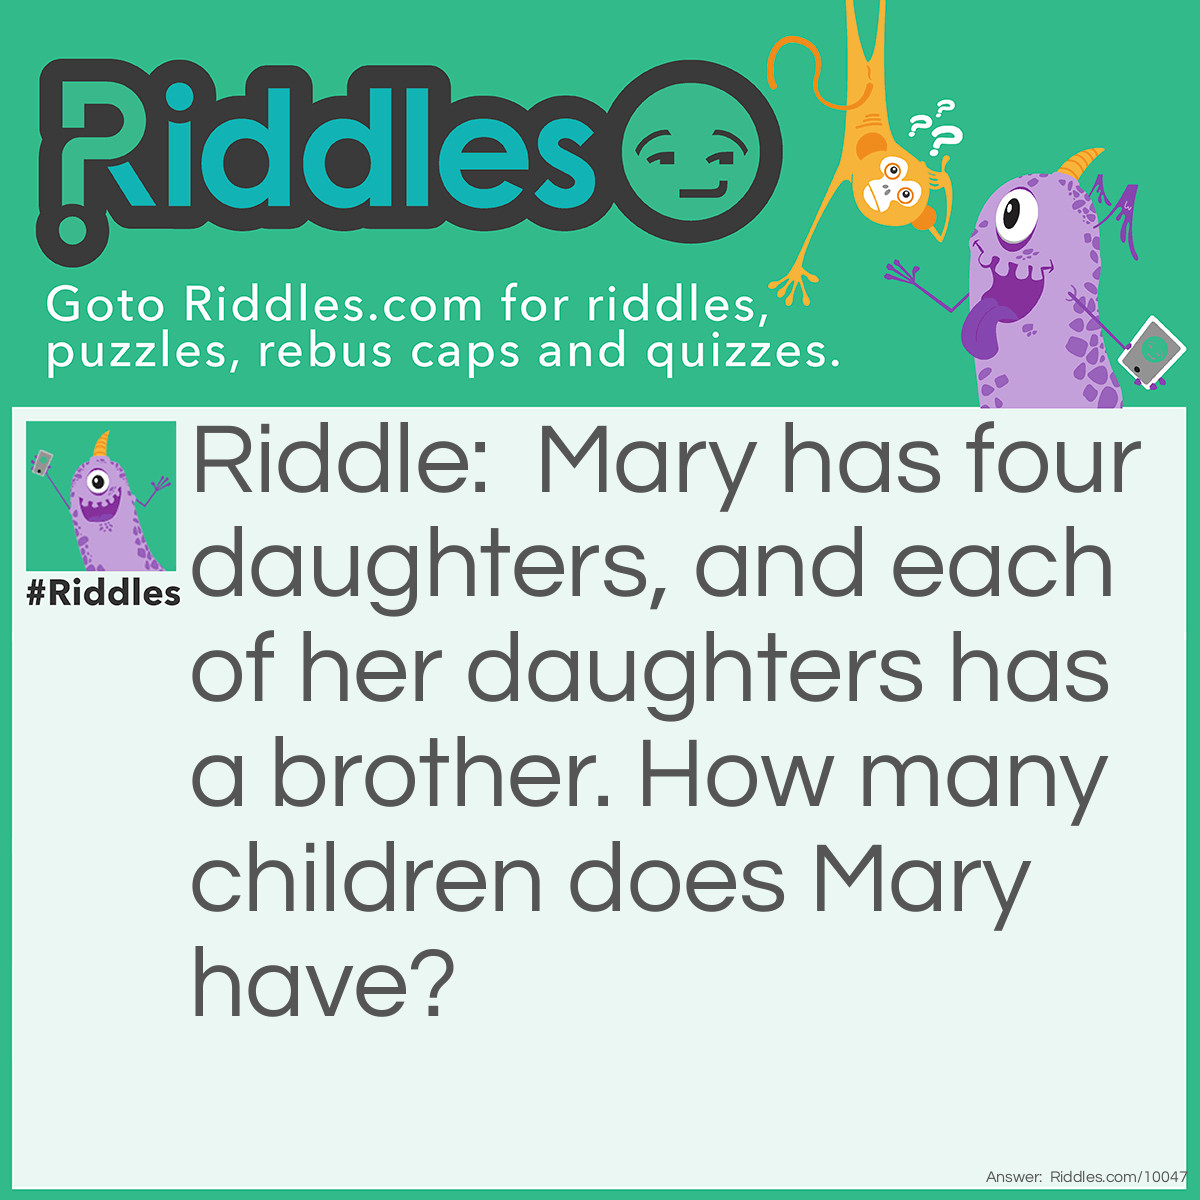 Riddle: Mary has four daughters, and each of her daughters has a brother. How many children does Mary have? Answer: Five-each daughter has the same brother.